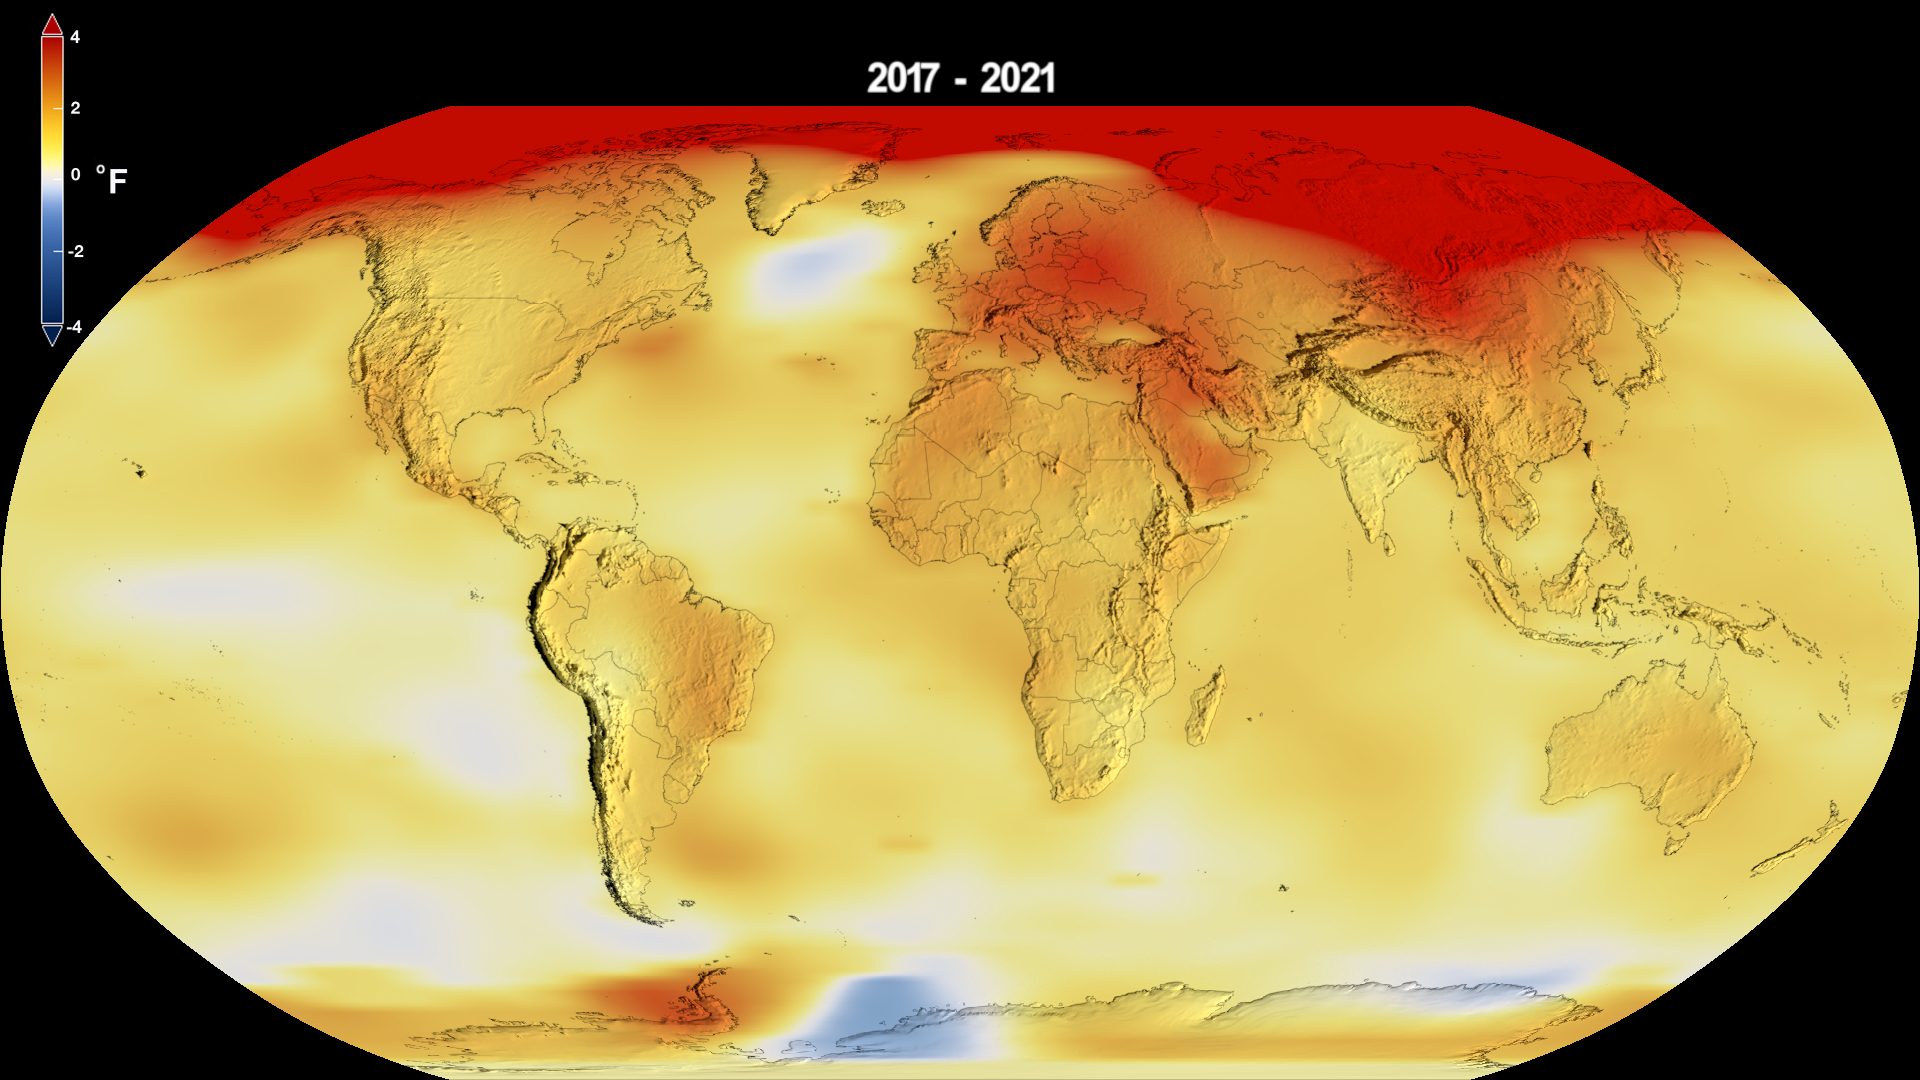 Global five-year average temperature anomalies from 2017-2021 from the NASA GISS analysis.